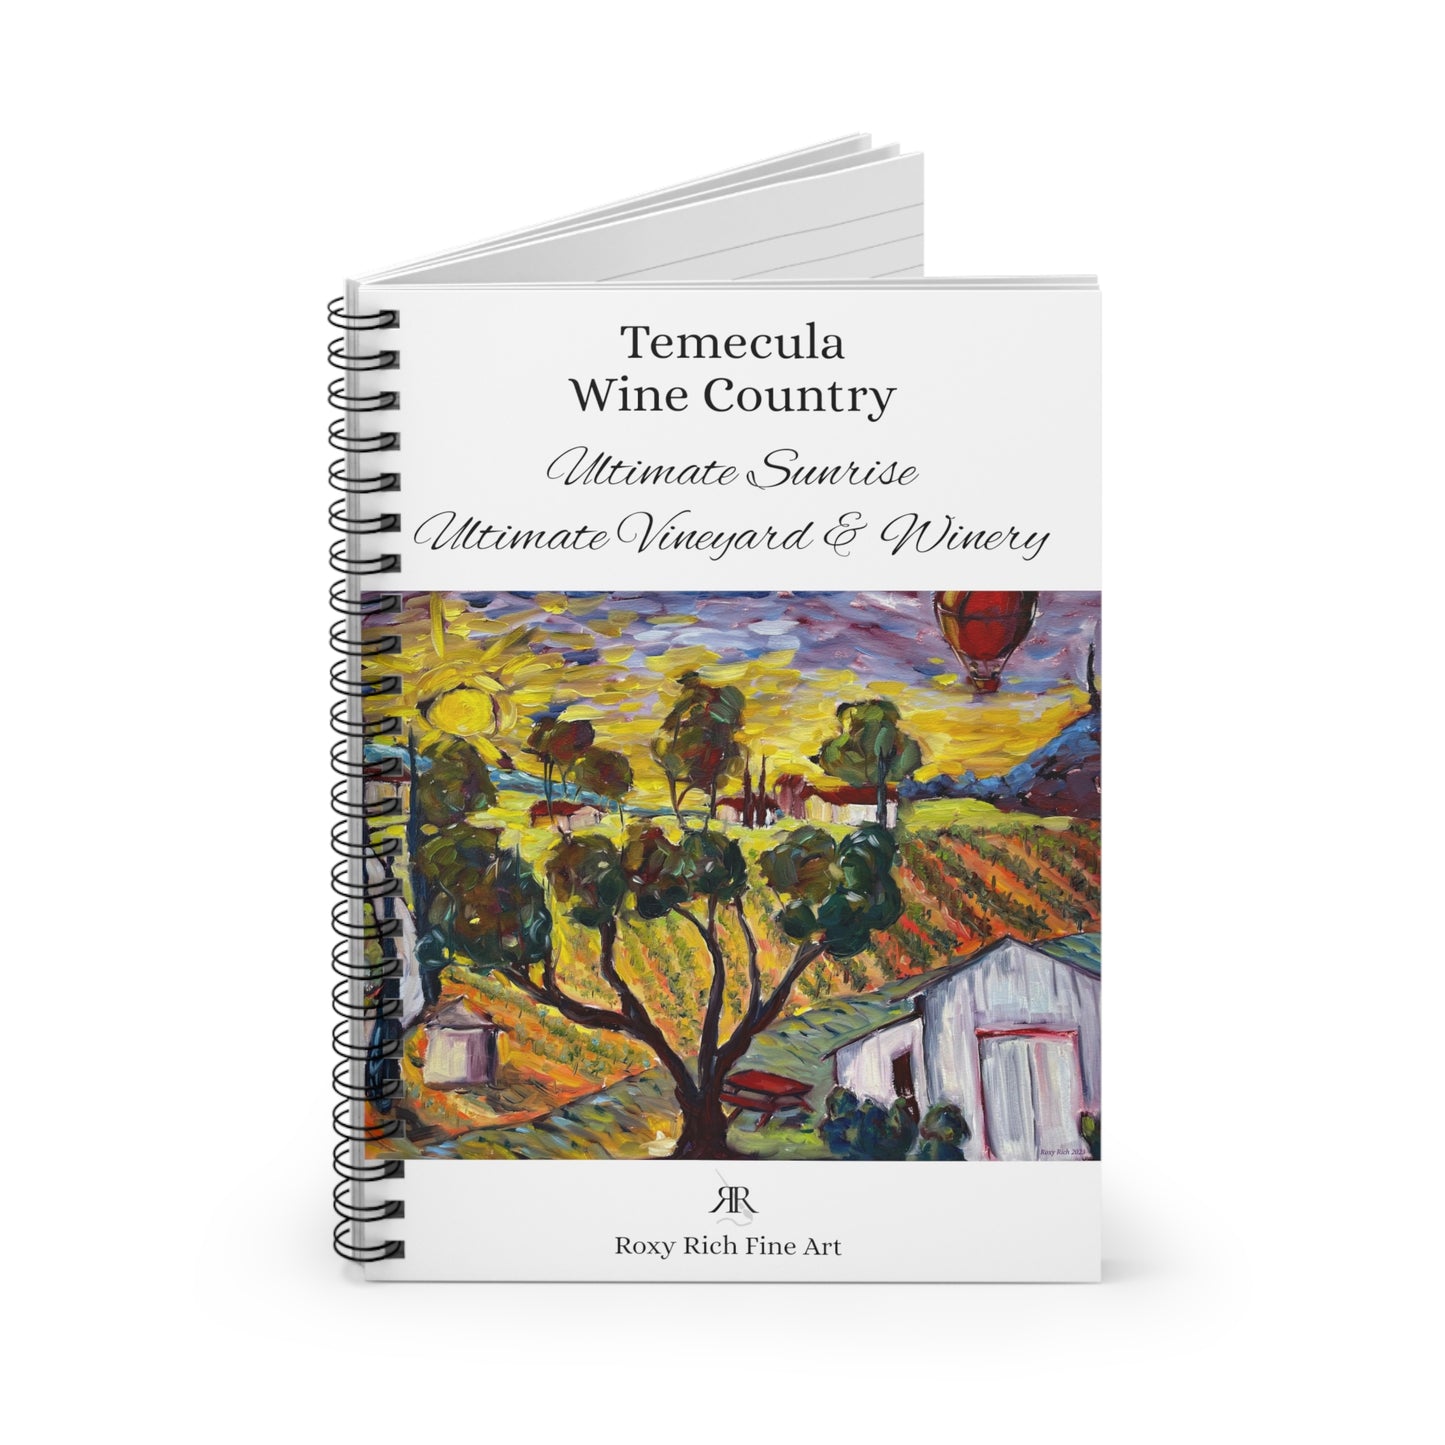 Temecula Wine Country "Ultimate Sunrise" Spiral Notebook